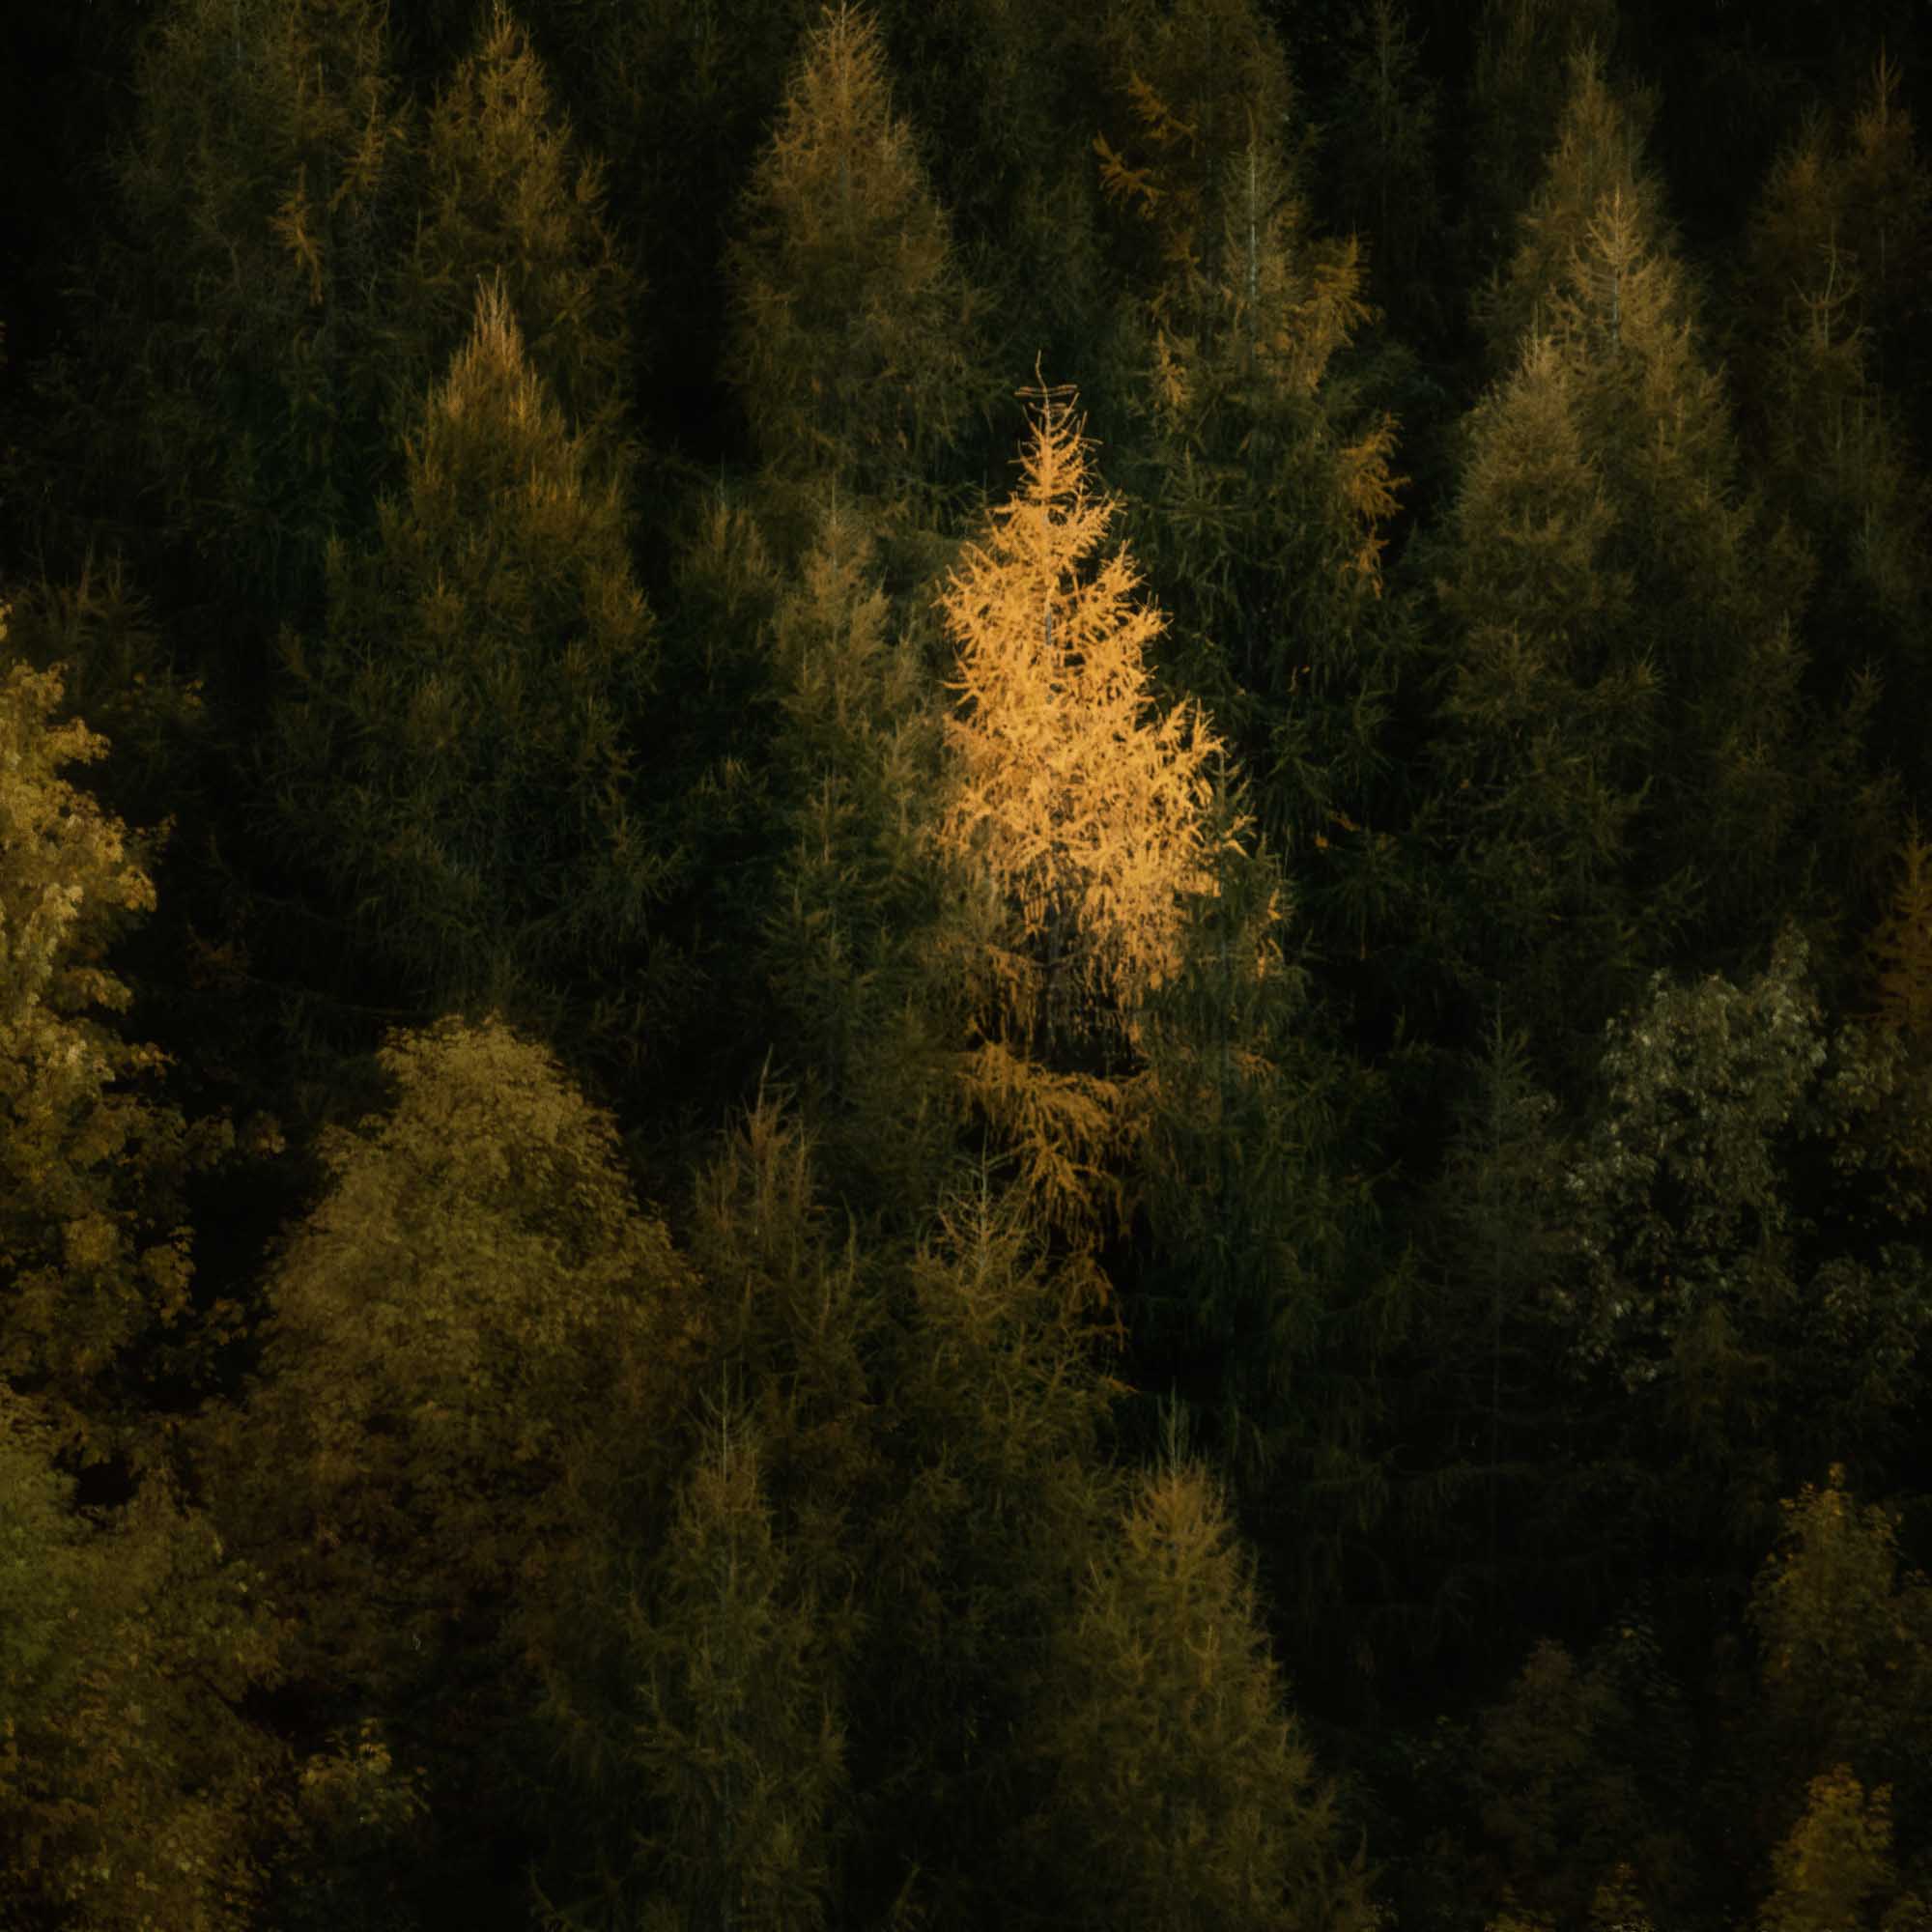 A single tree stands illuminated in gold against the dark green backdrop of a dense forest in New Zealand.